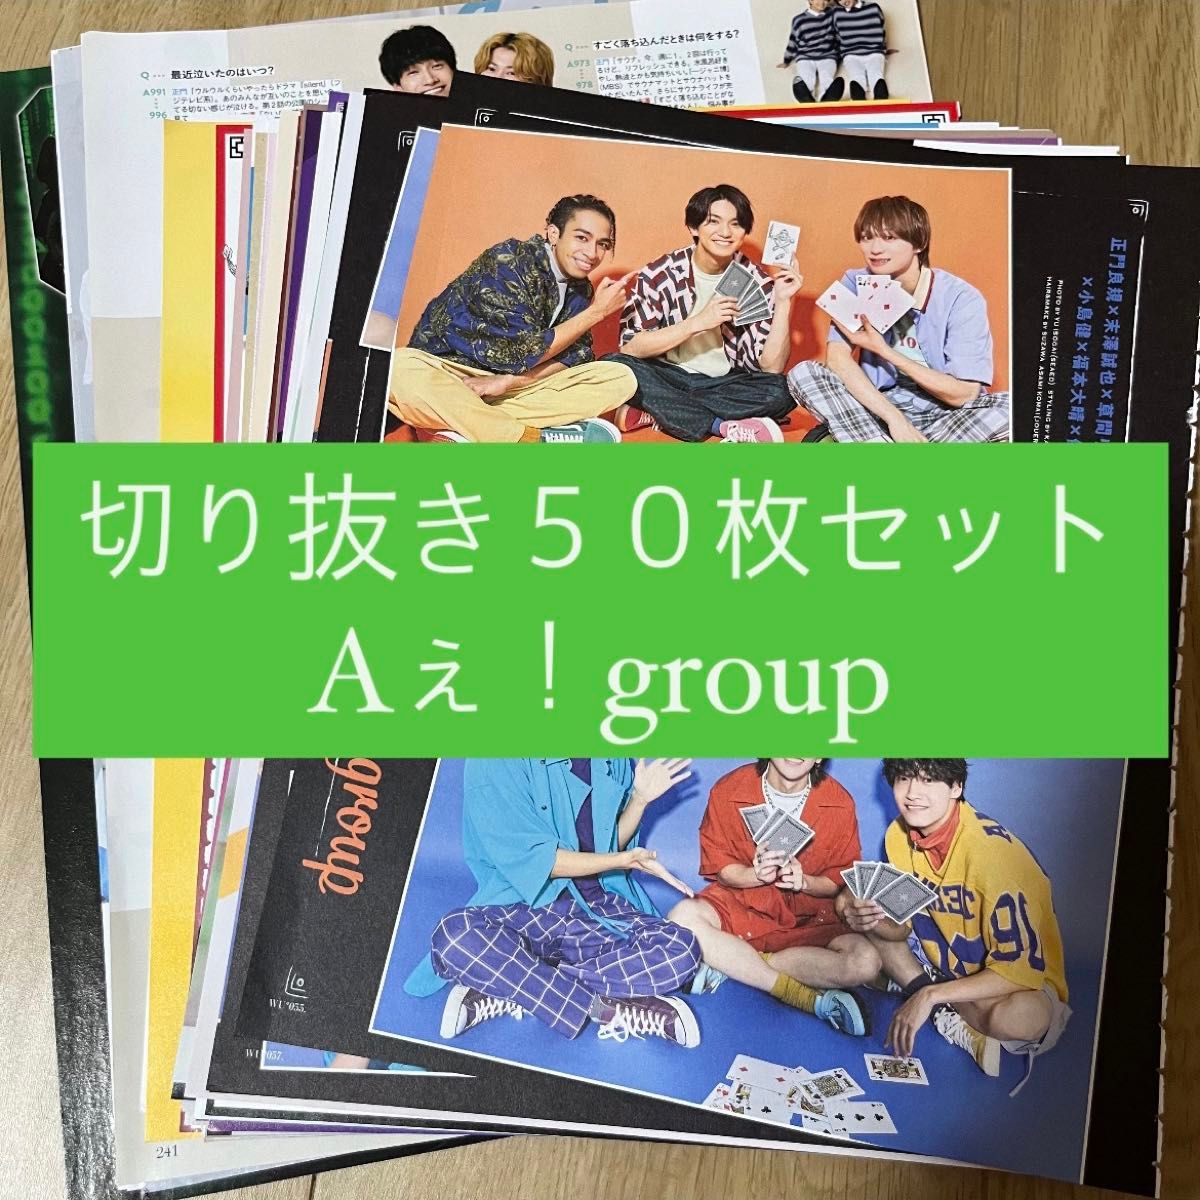 [71] Aぇ！group 切り抜き 50枚セット まとめ売り 大量